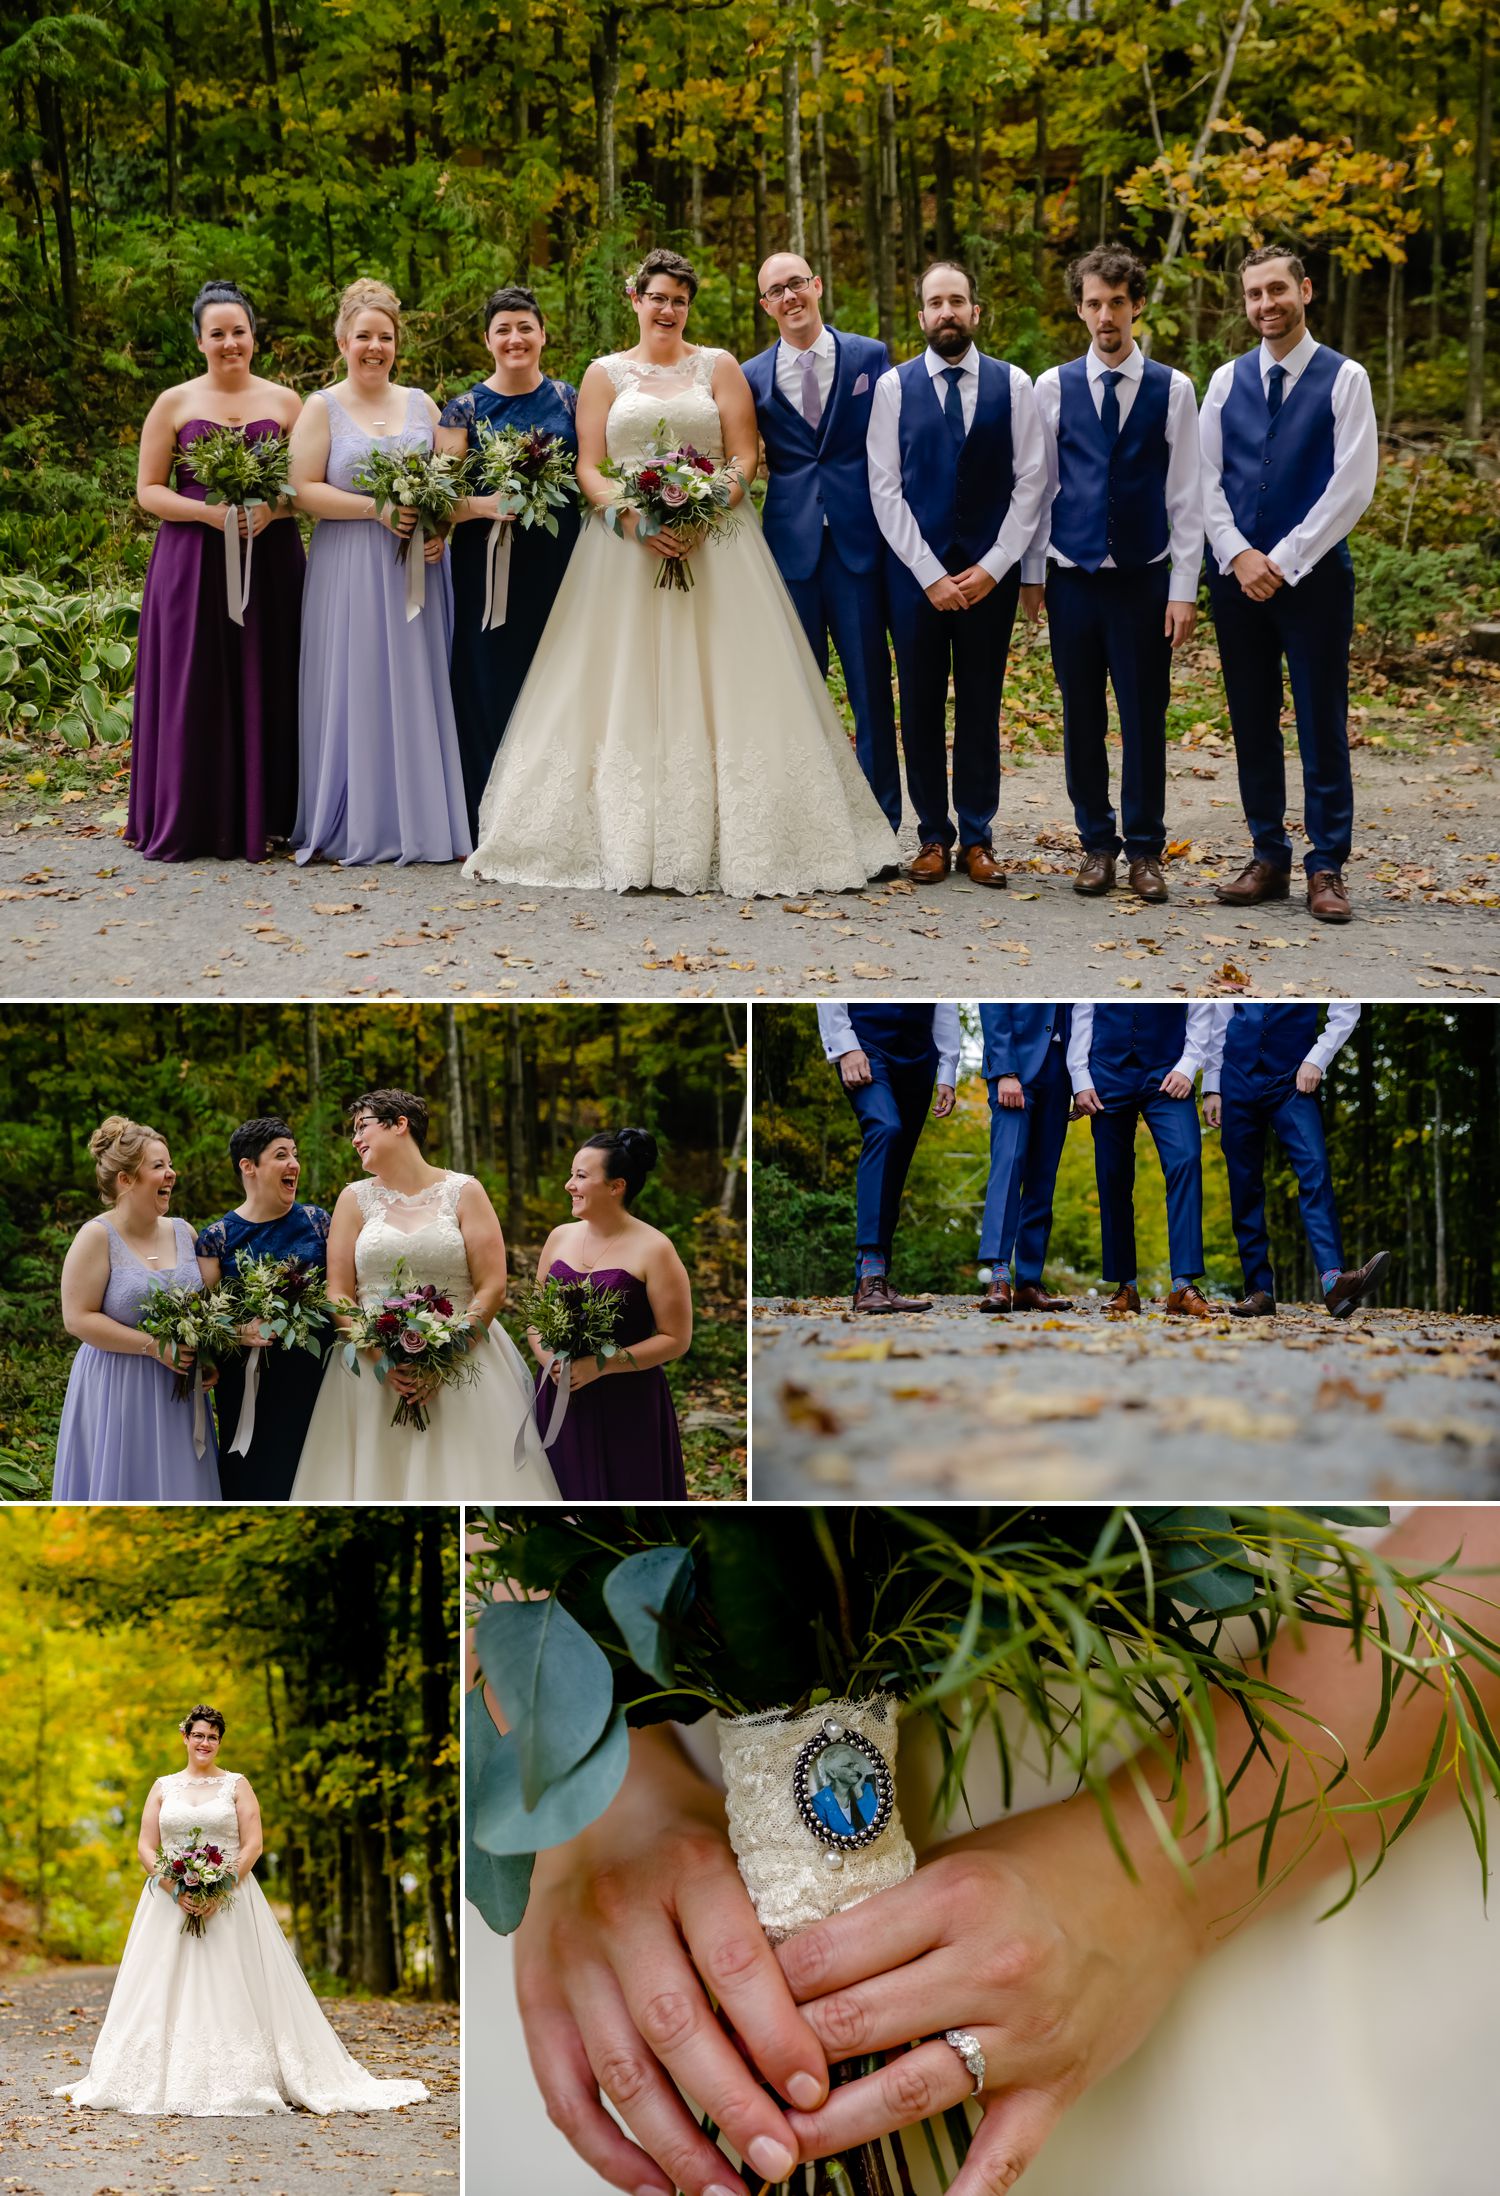 Portraits taken of the bride and groom and their wedding party party after their outdoor ceremony at La Grange de la Gatineau